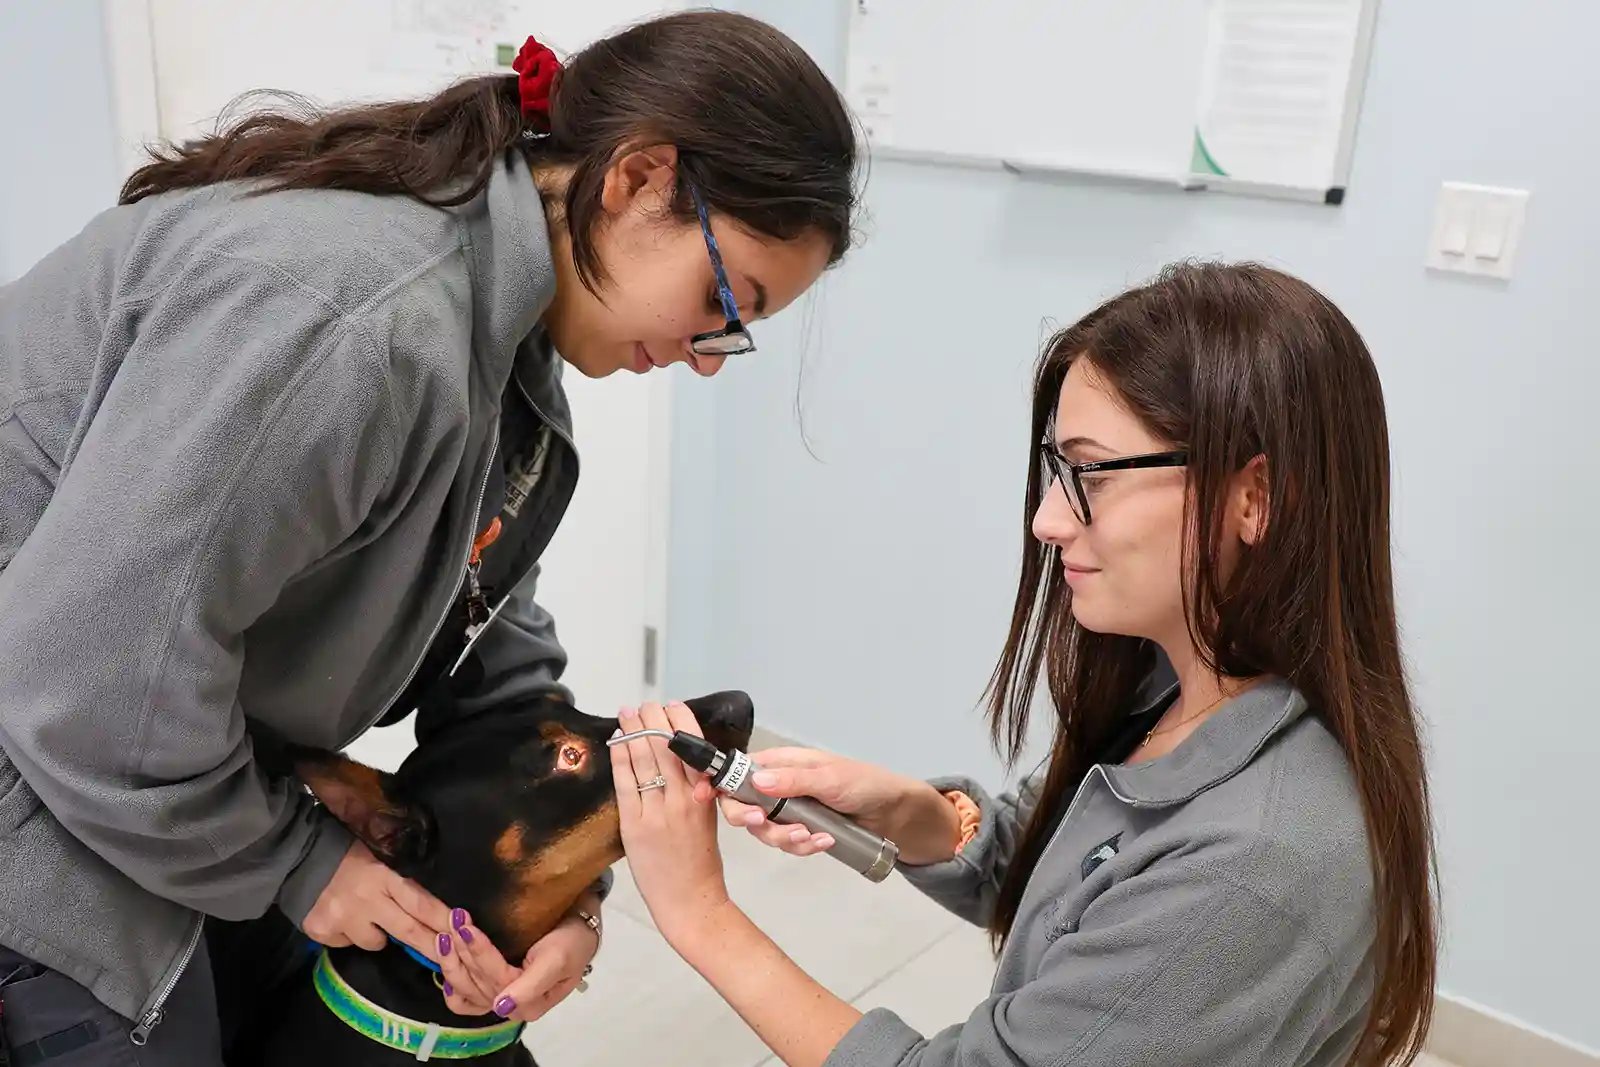 Dr. Thibault examines a Doberman Pincher for wobblers in dogs